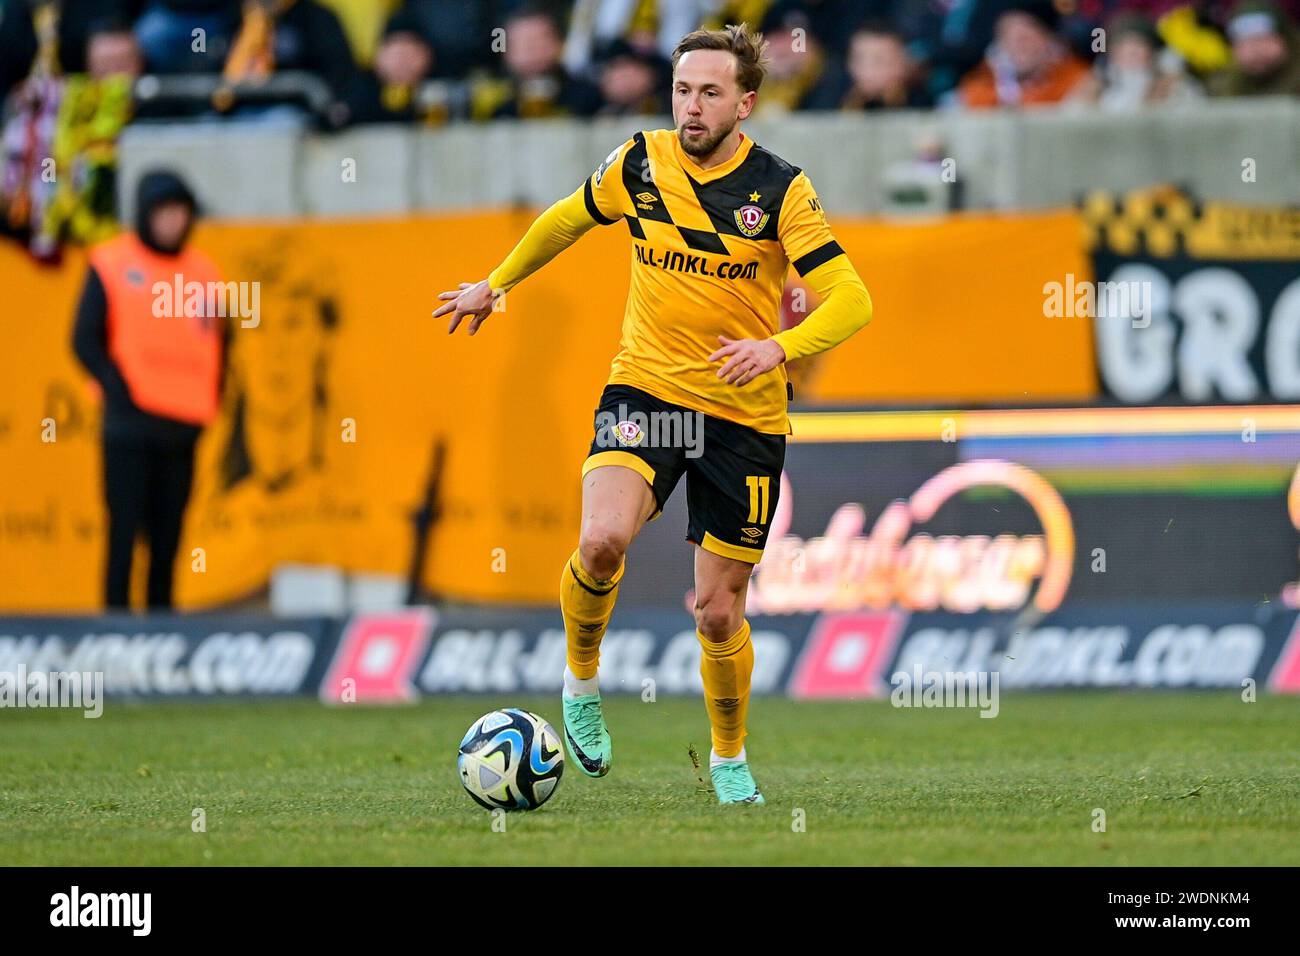 Dresden, Deutschland. 20th Jan, 2024. Lucas Cueto (Dresden, 11) am Ball, Freisteller, Einzelbild, Aktion, Action, 20.01.2024, Dresden (Deutschland), Fussball, 3. Liga, SG Dynamo Dresden - SV Sandhausen, DFB/DFL REGULATIONS PROHIBIT ANY USE OF PHOTOGRAPHS AS IMAGE SEQUENCES AND/OR QUASI-VIDEO. Credit: dpa/Alamy Live News Stock Photo